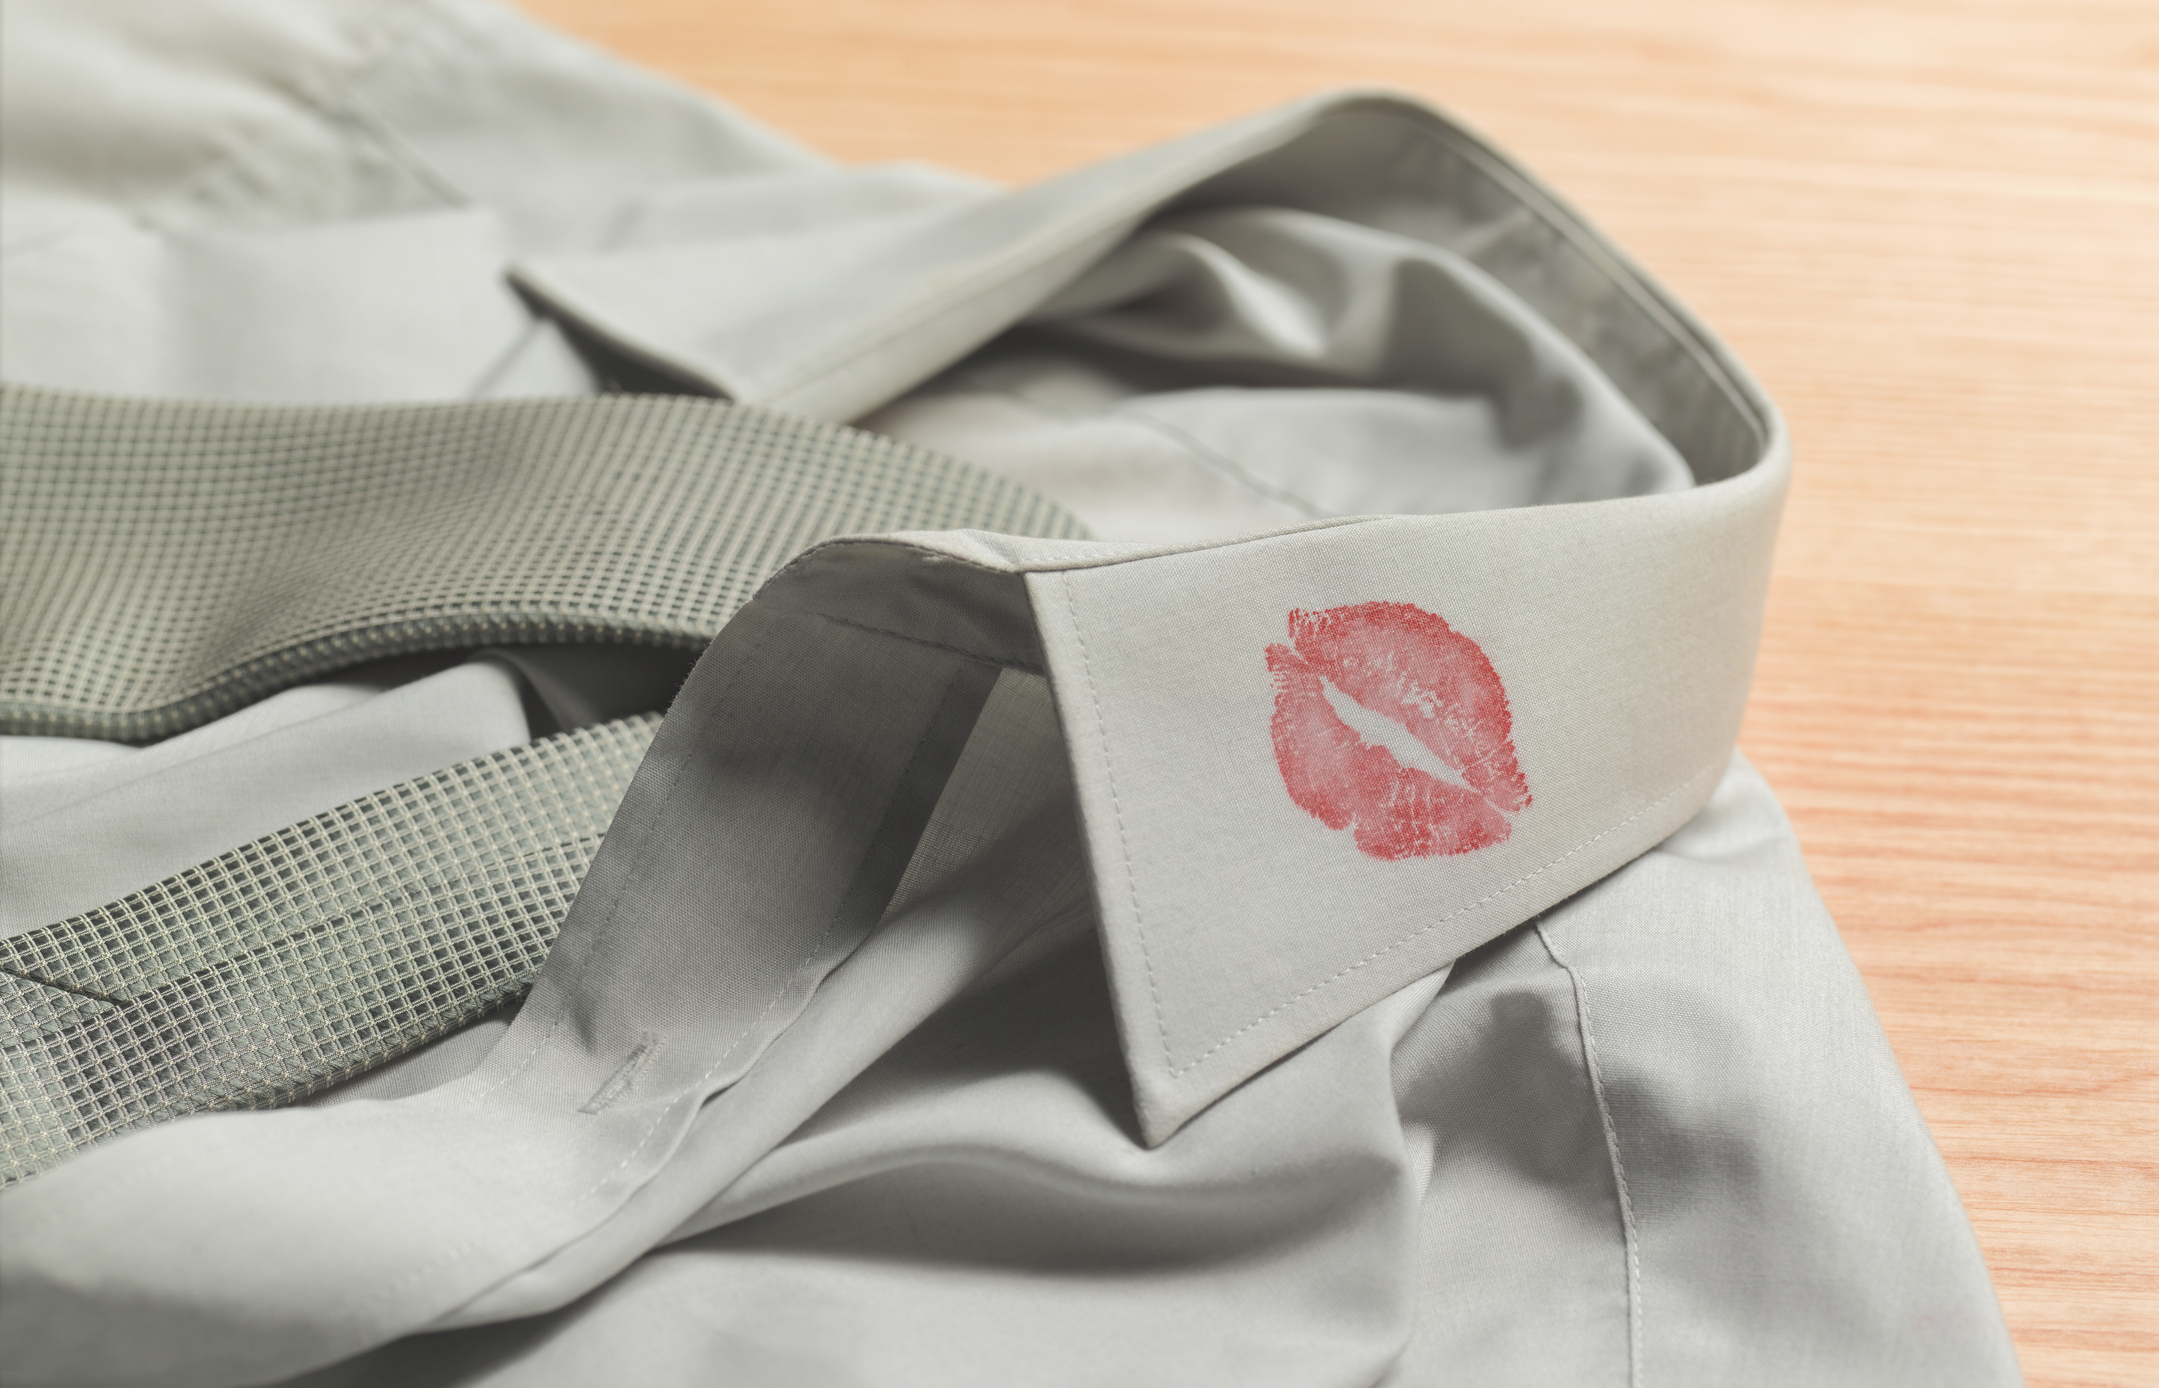 Gray shirt with a red lipstick mark on the collar